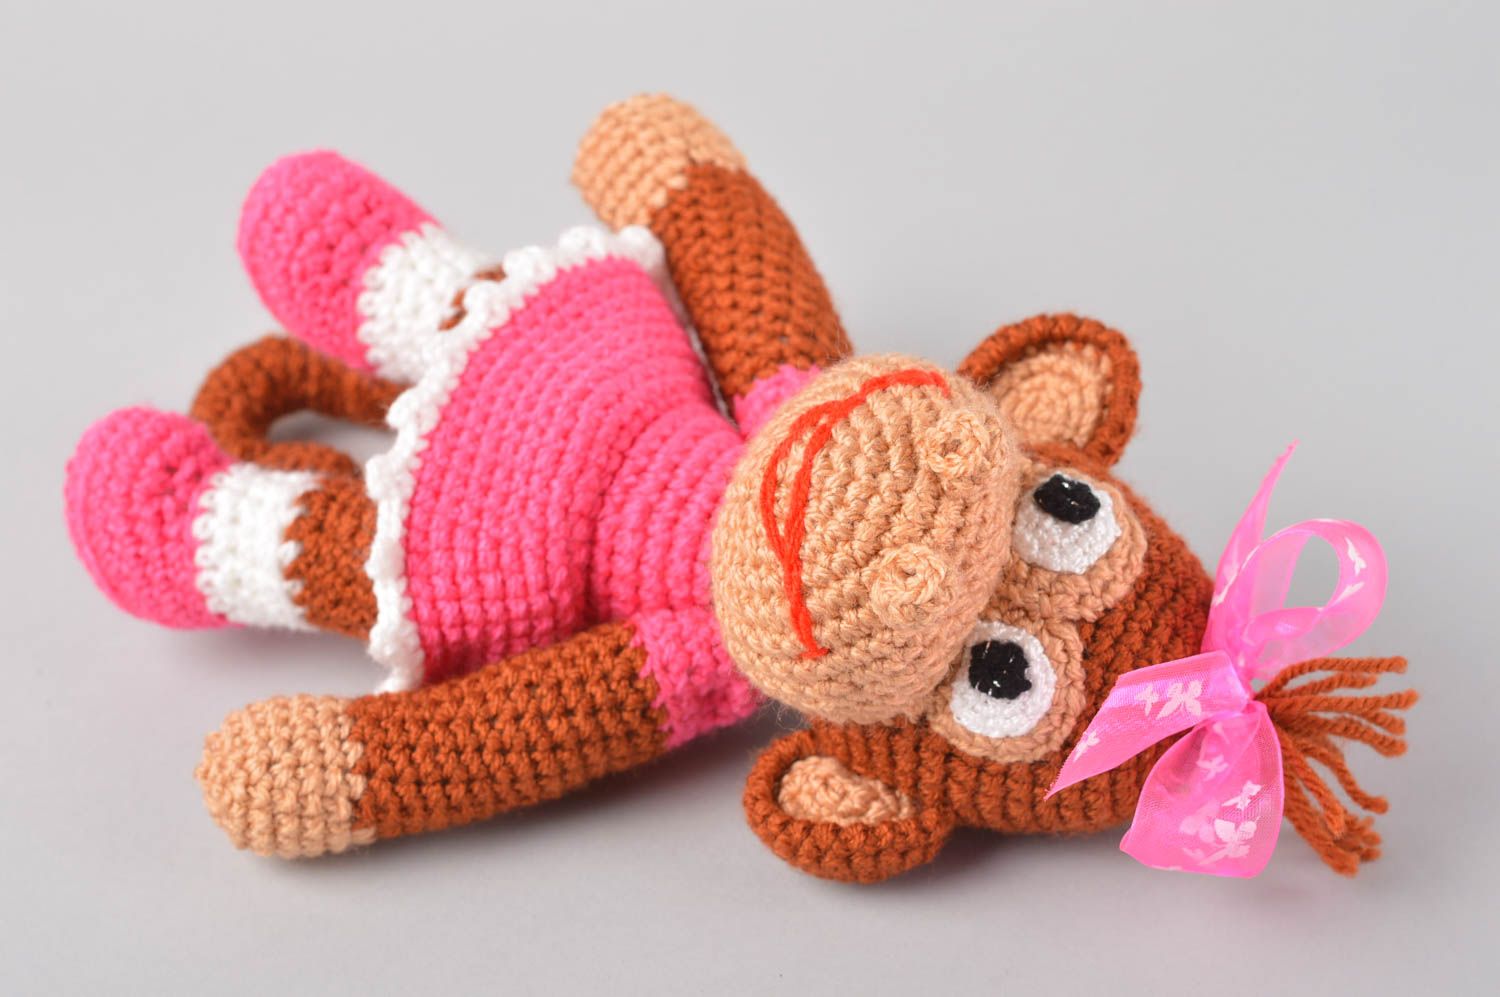 Handmade toy animal toy soft toy gift for baby unusual gift decor ideas photo 3